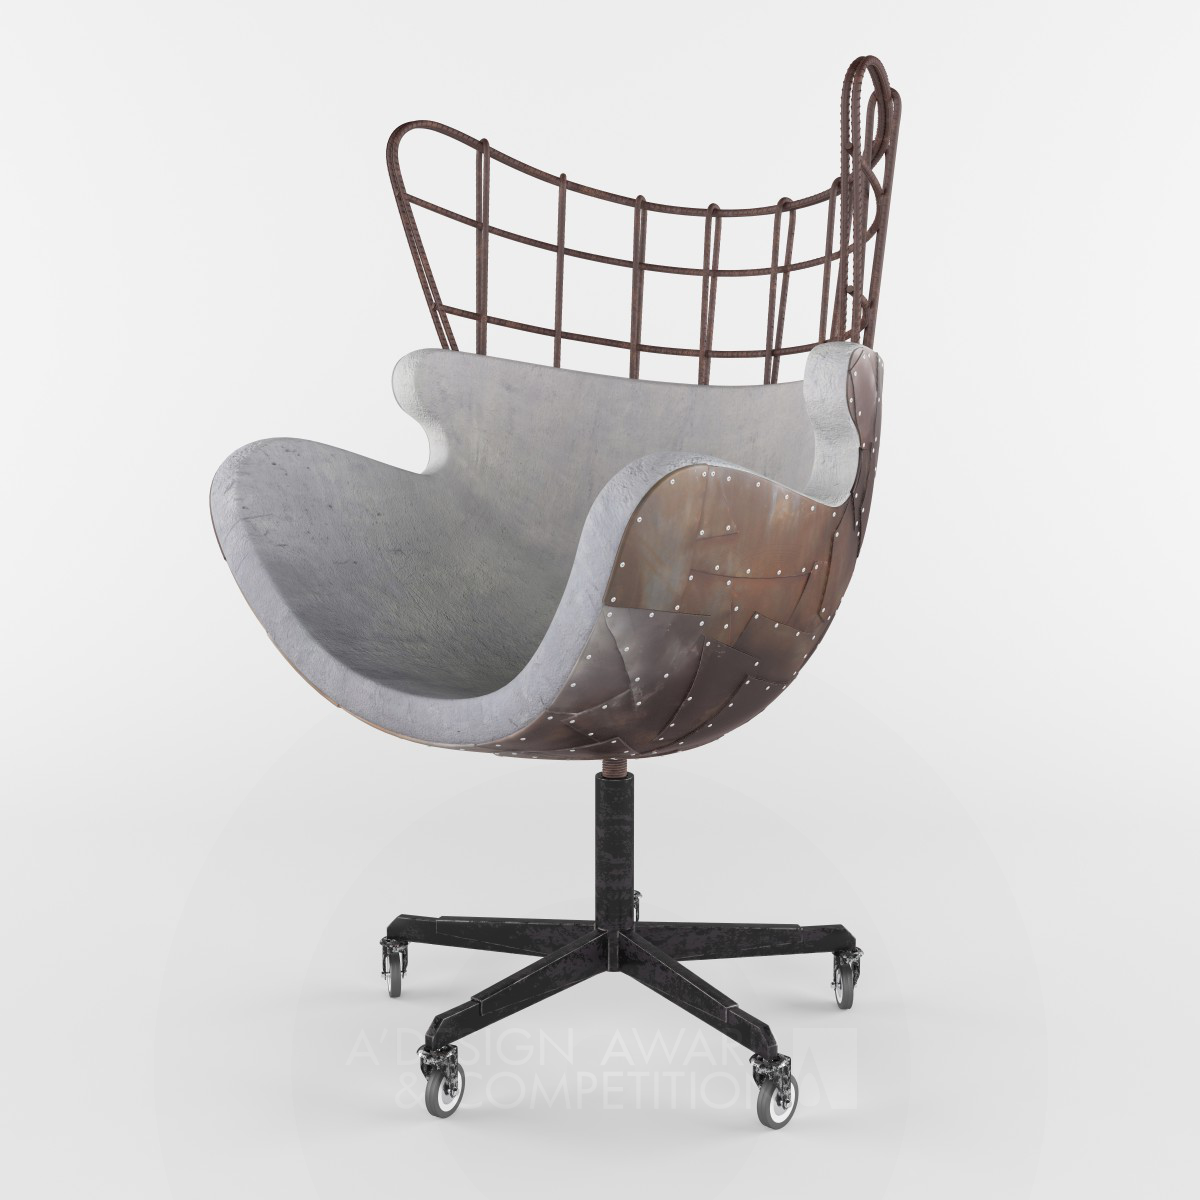 Egg of Concrete Chair by Fatemeh Fooladi